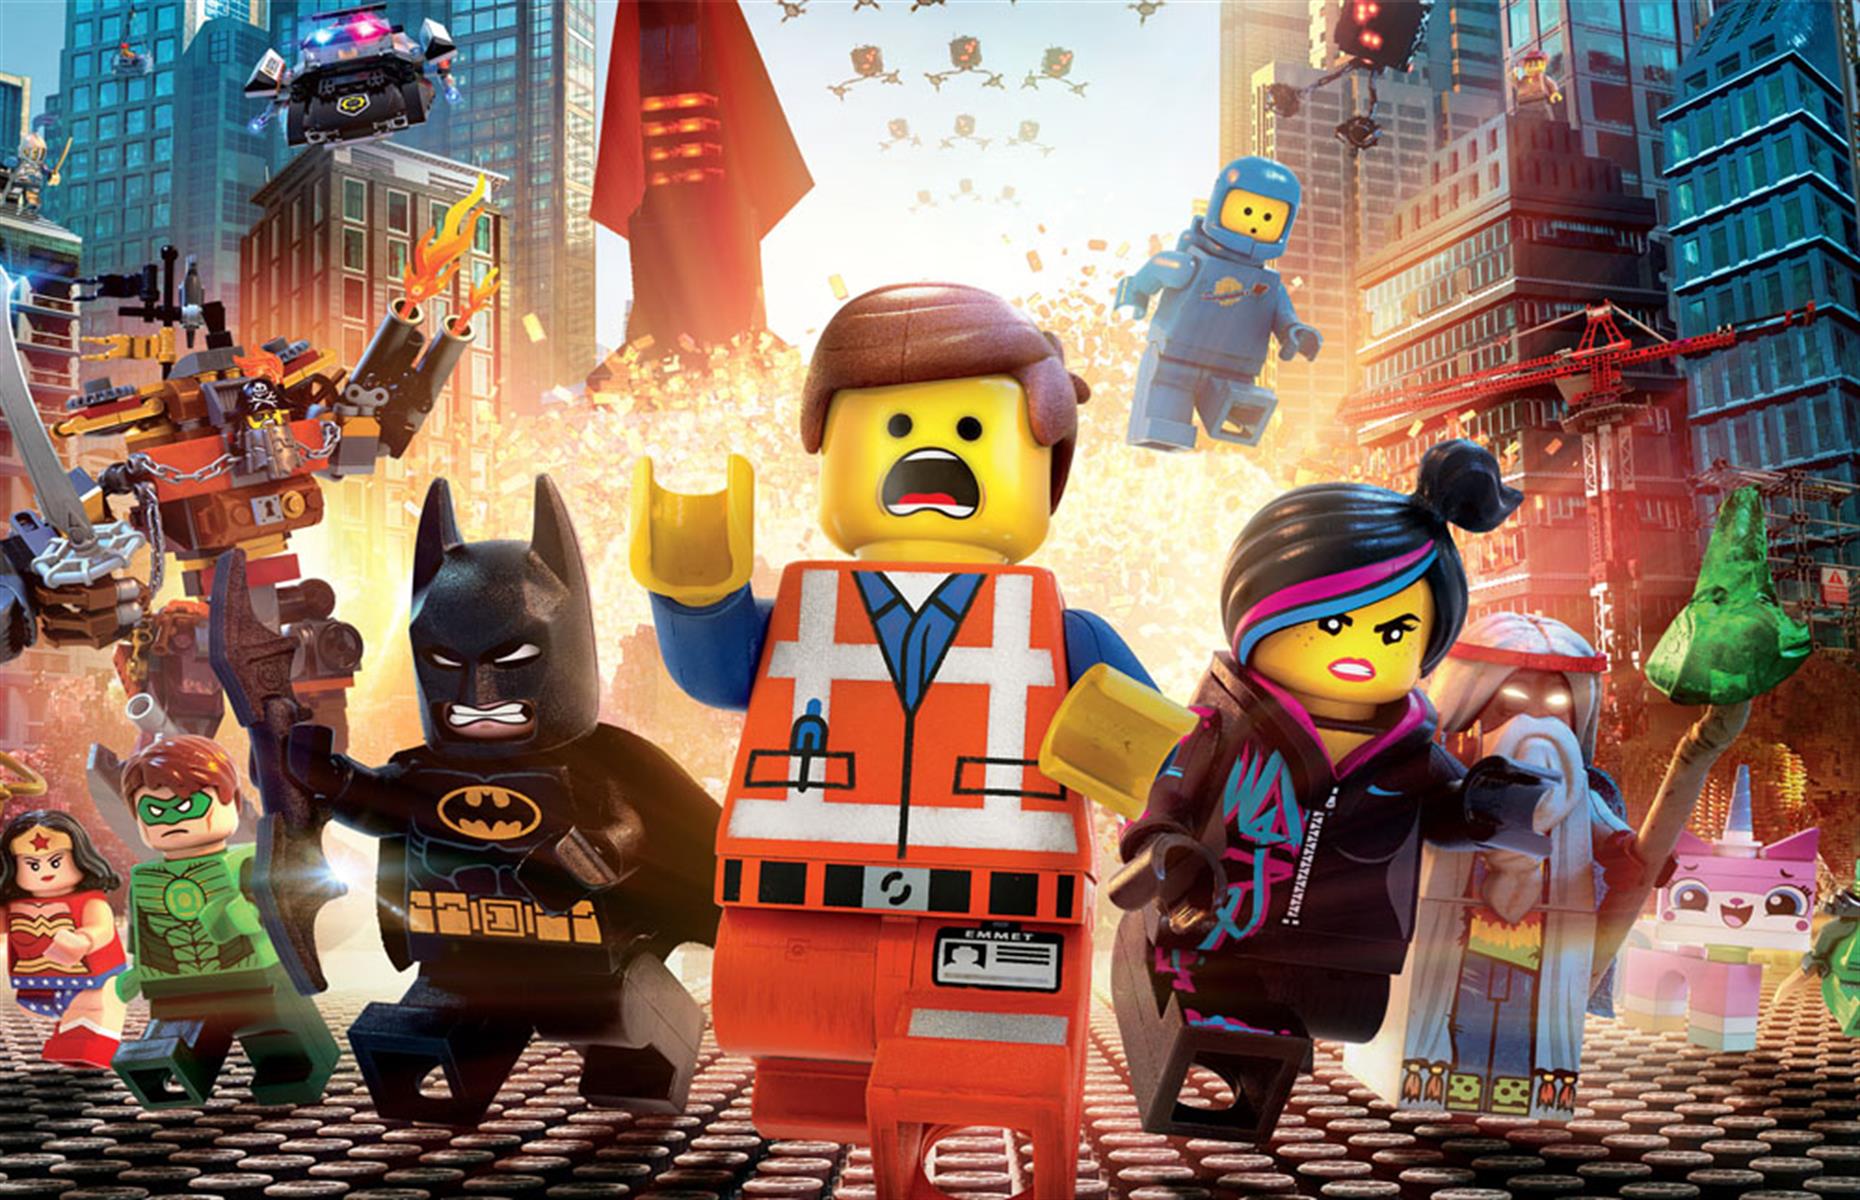 2014: Lego in The Lego Movie